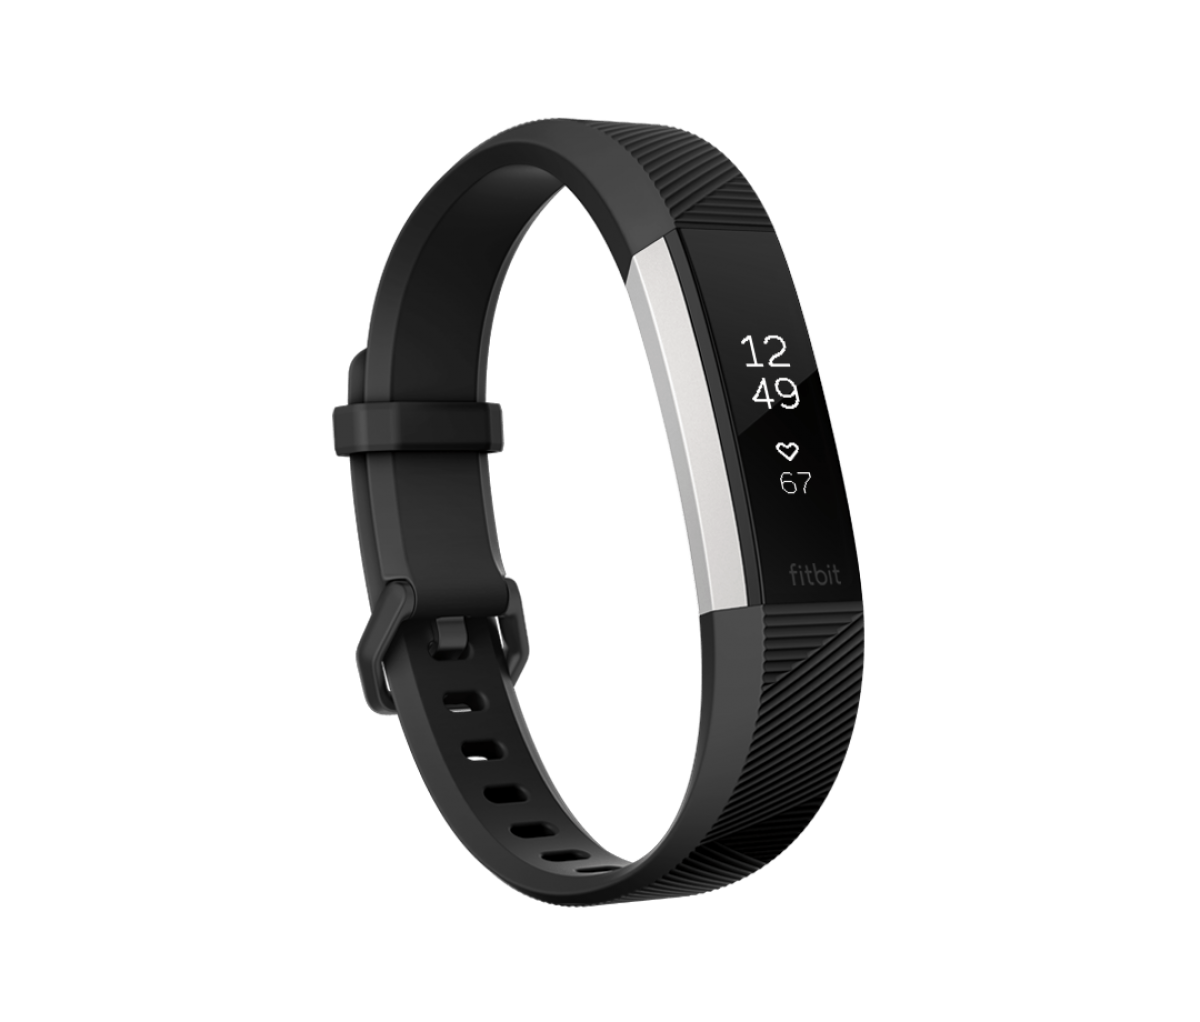 fitbit connect sync now